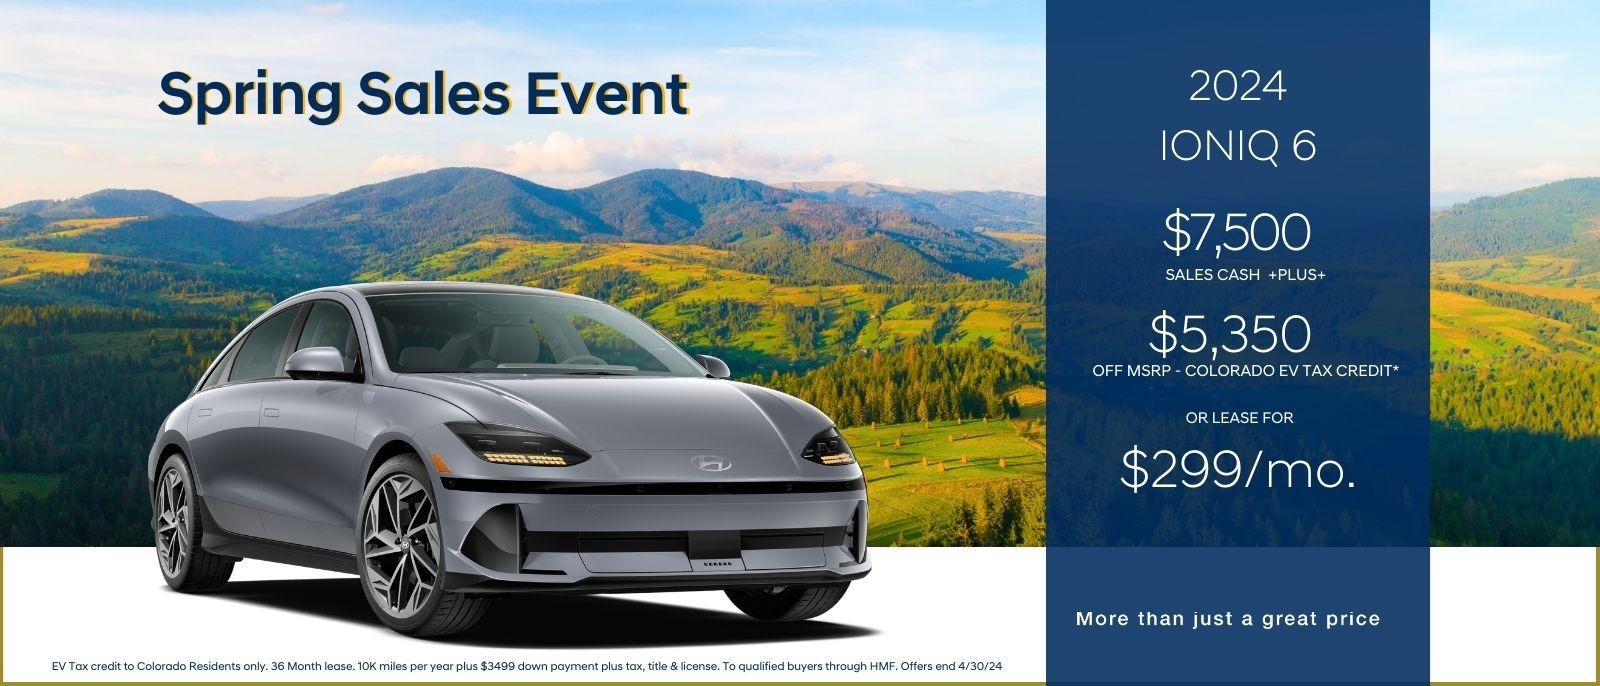 Spring Sales Event 

2024 Ioniq 6 
$7,500 sales cash plus 
$5,350 off MSRP- Colorado EV Tax Credit
or lease for $299/mo

More than just a great price